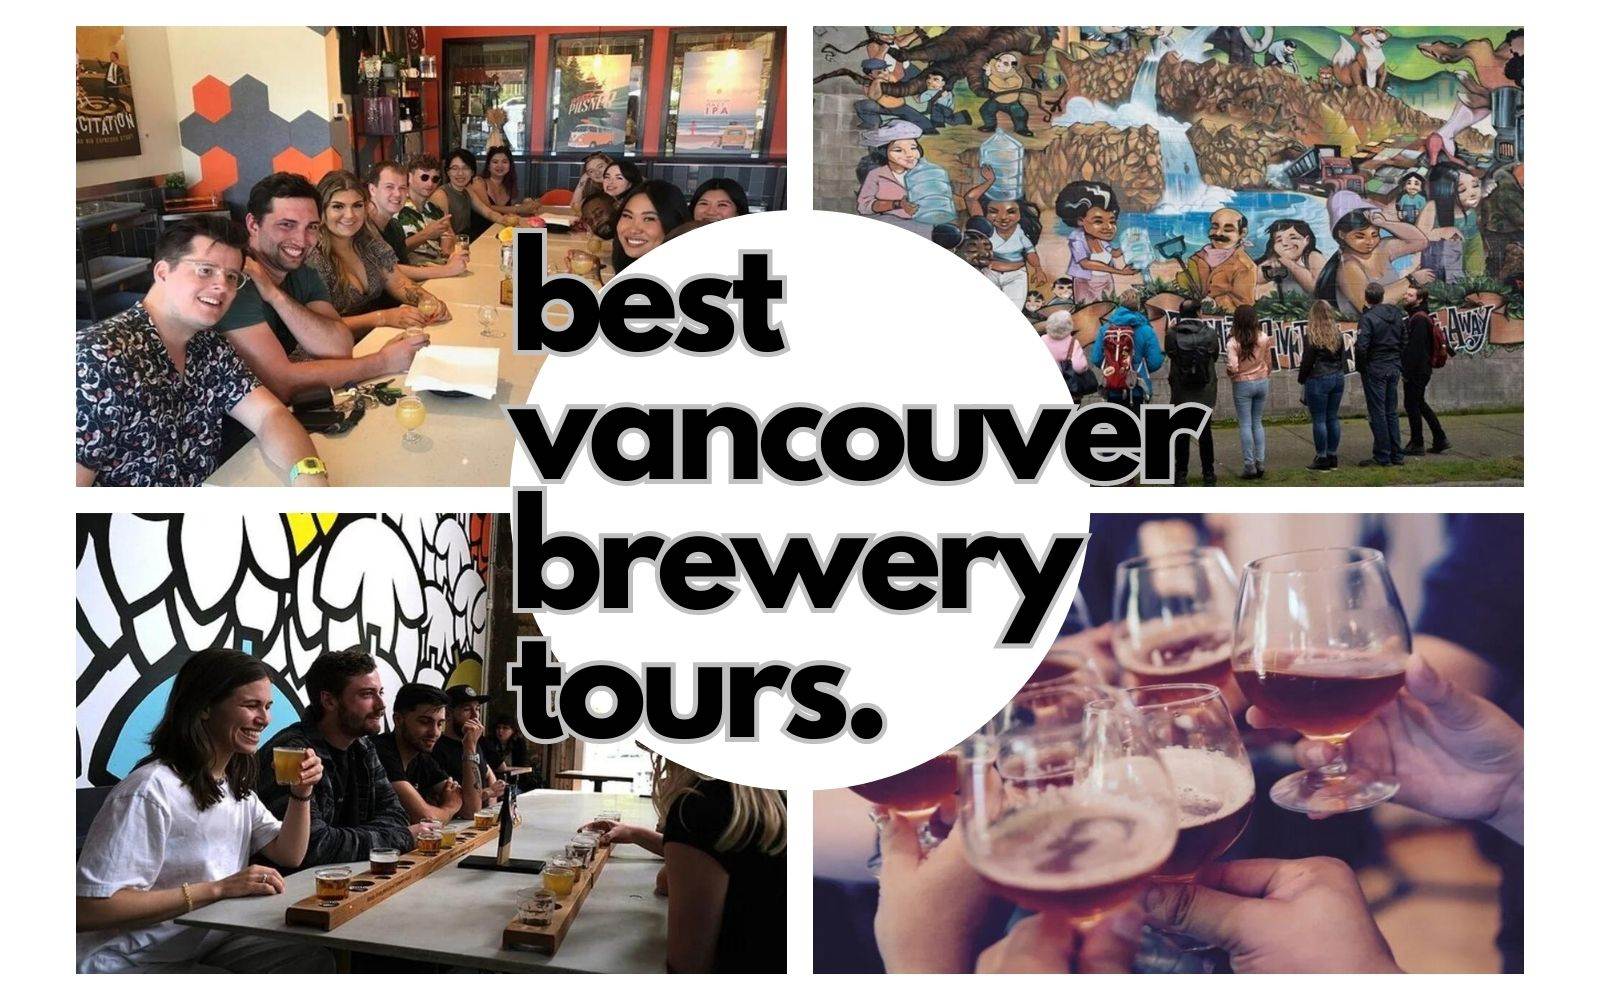 vancouver brewery tour with cheers glasses and fun young groups